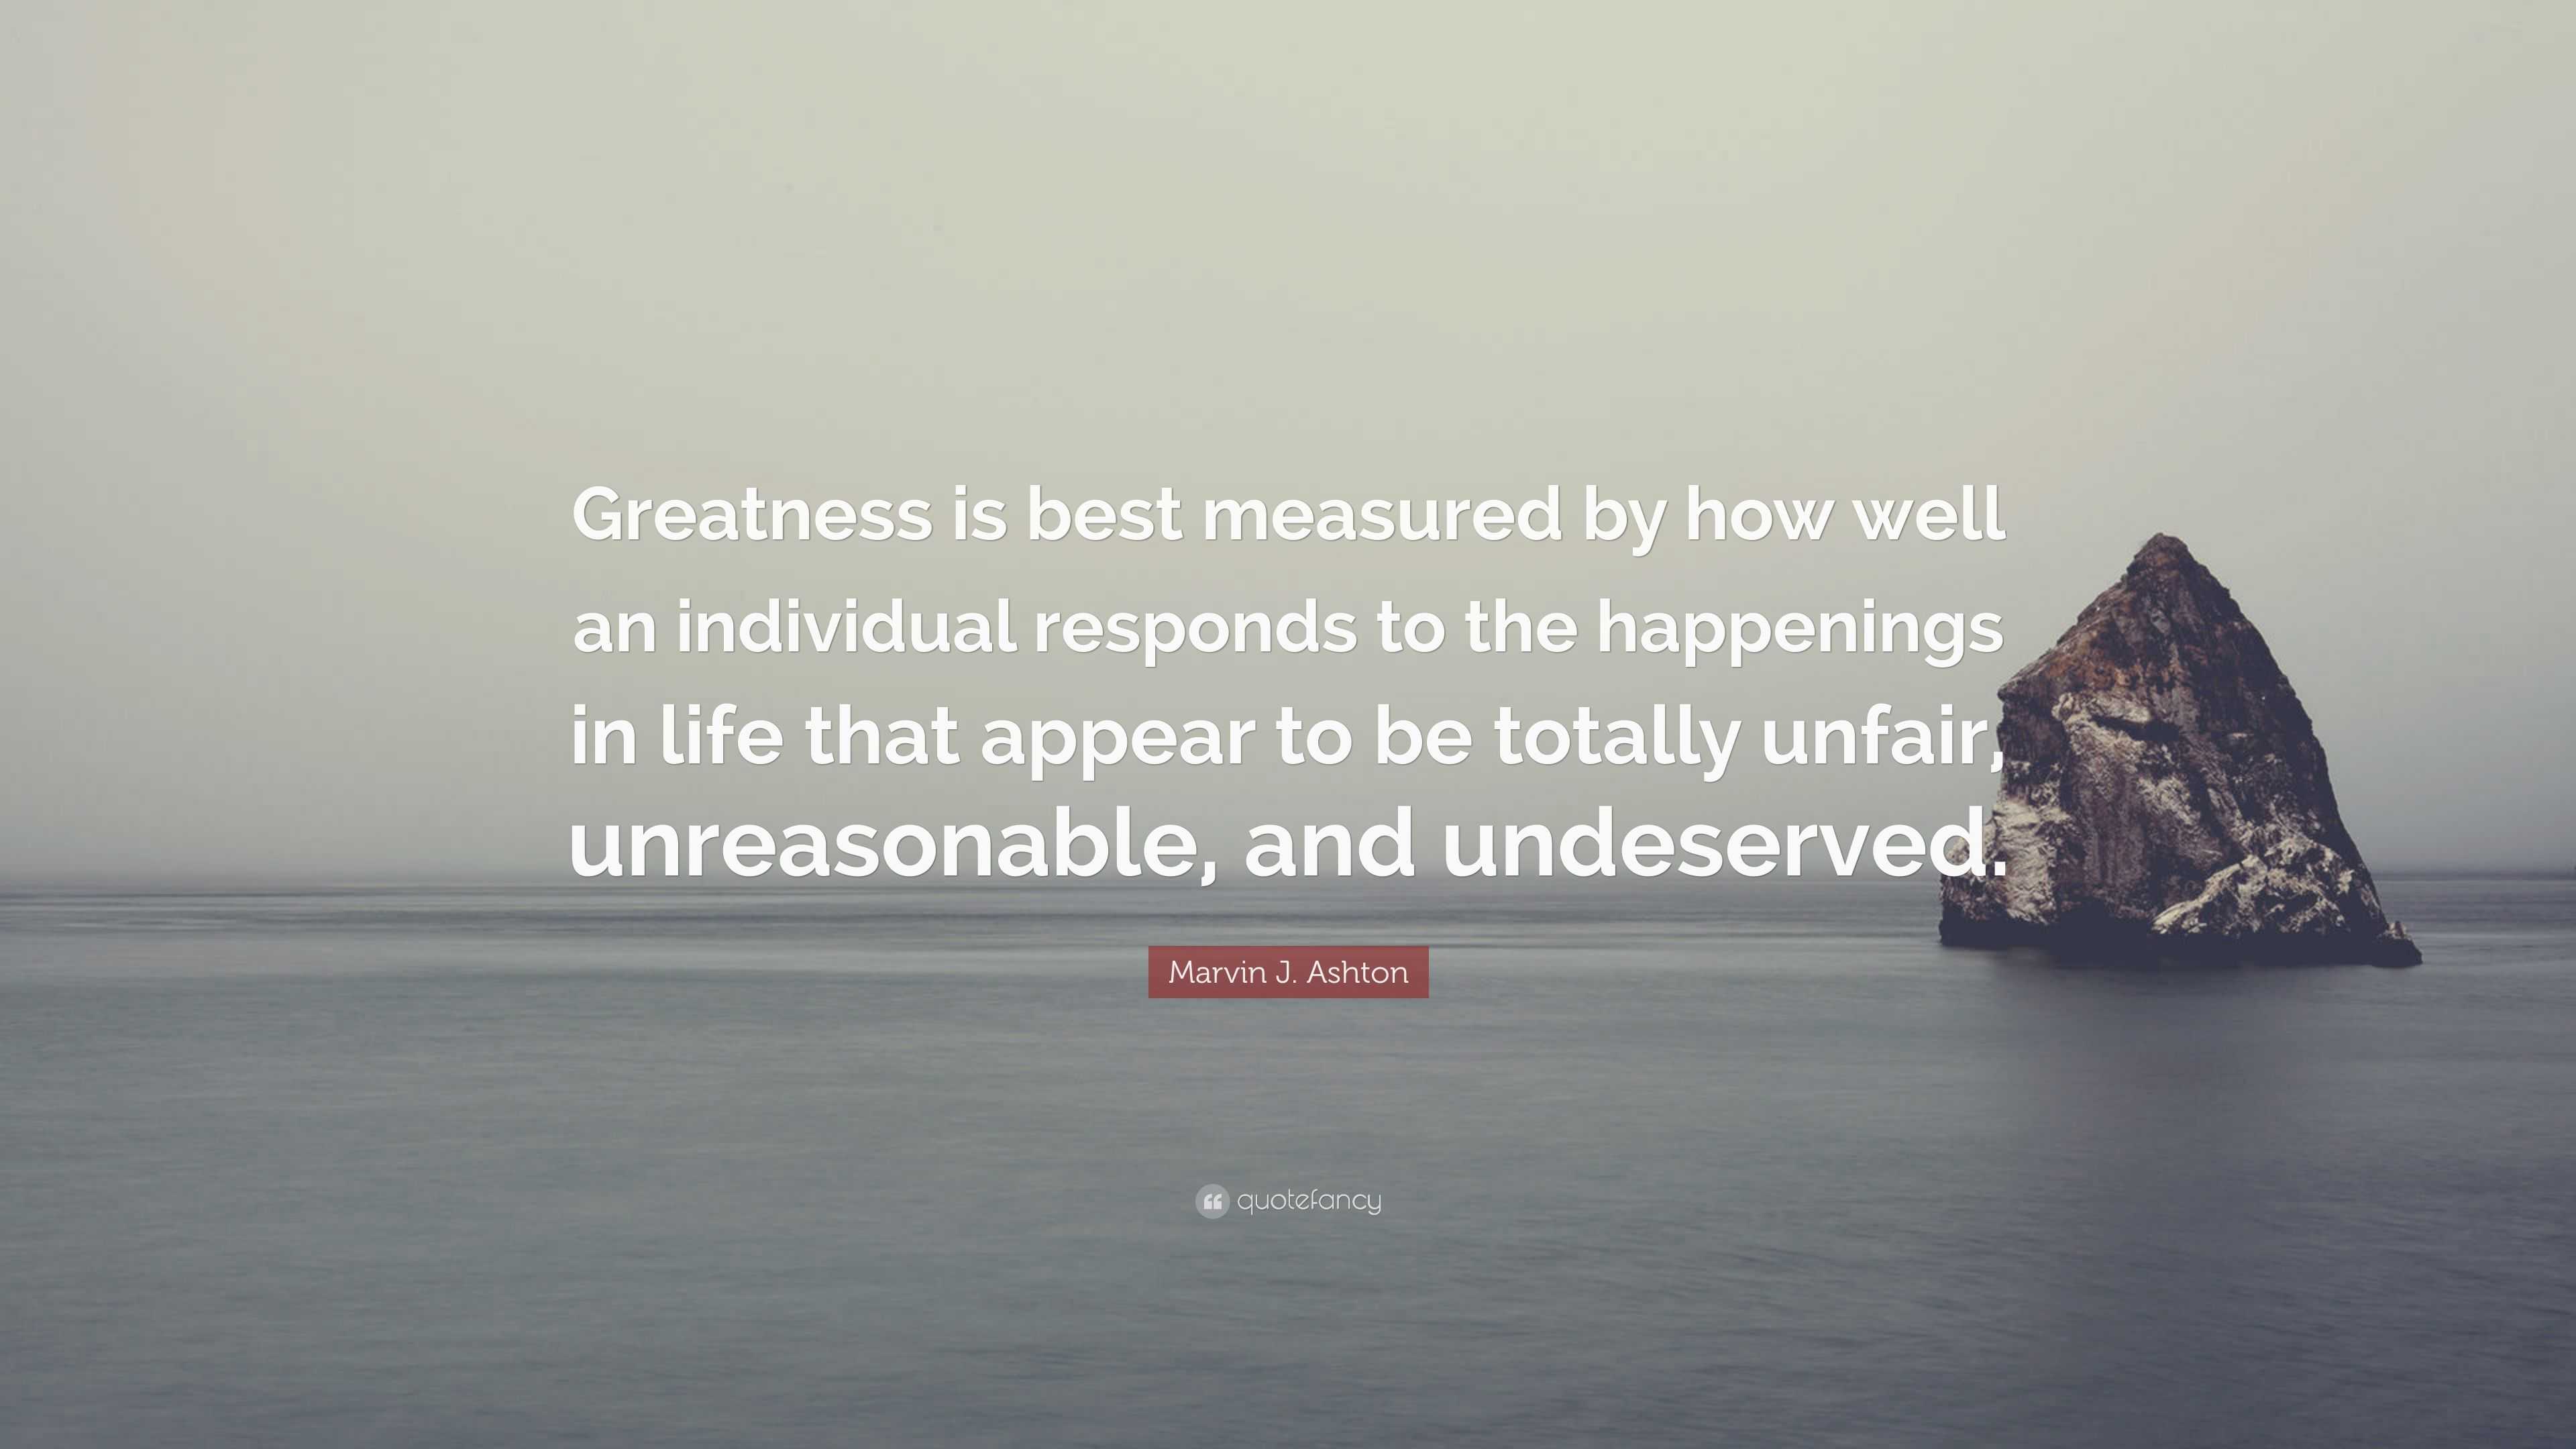 Marvin J Ashton Quote “Greatness is best measured by how well an individual